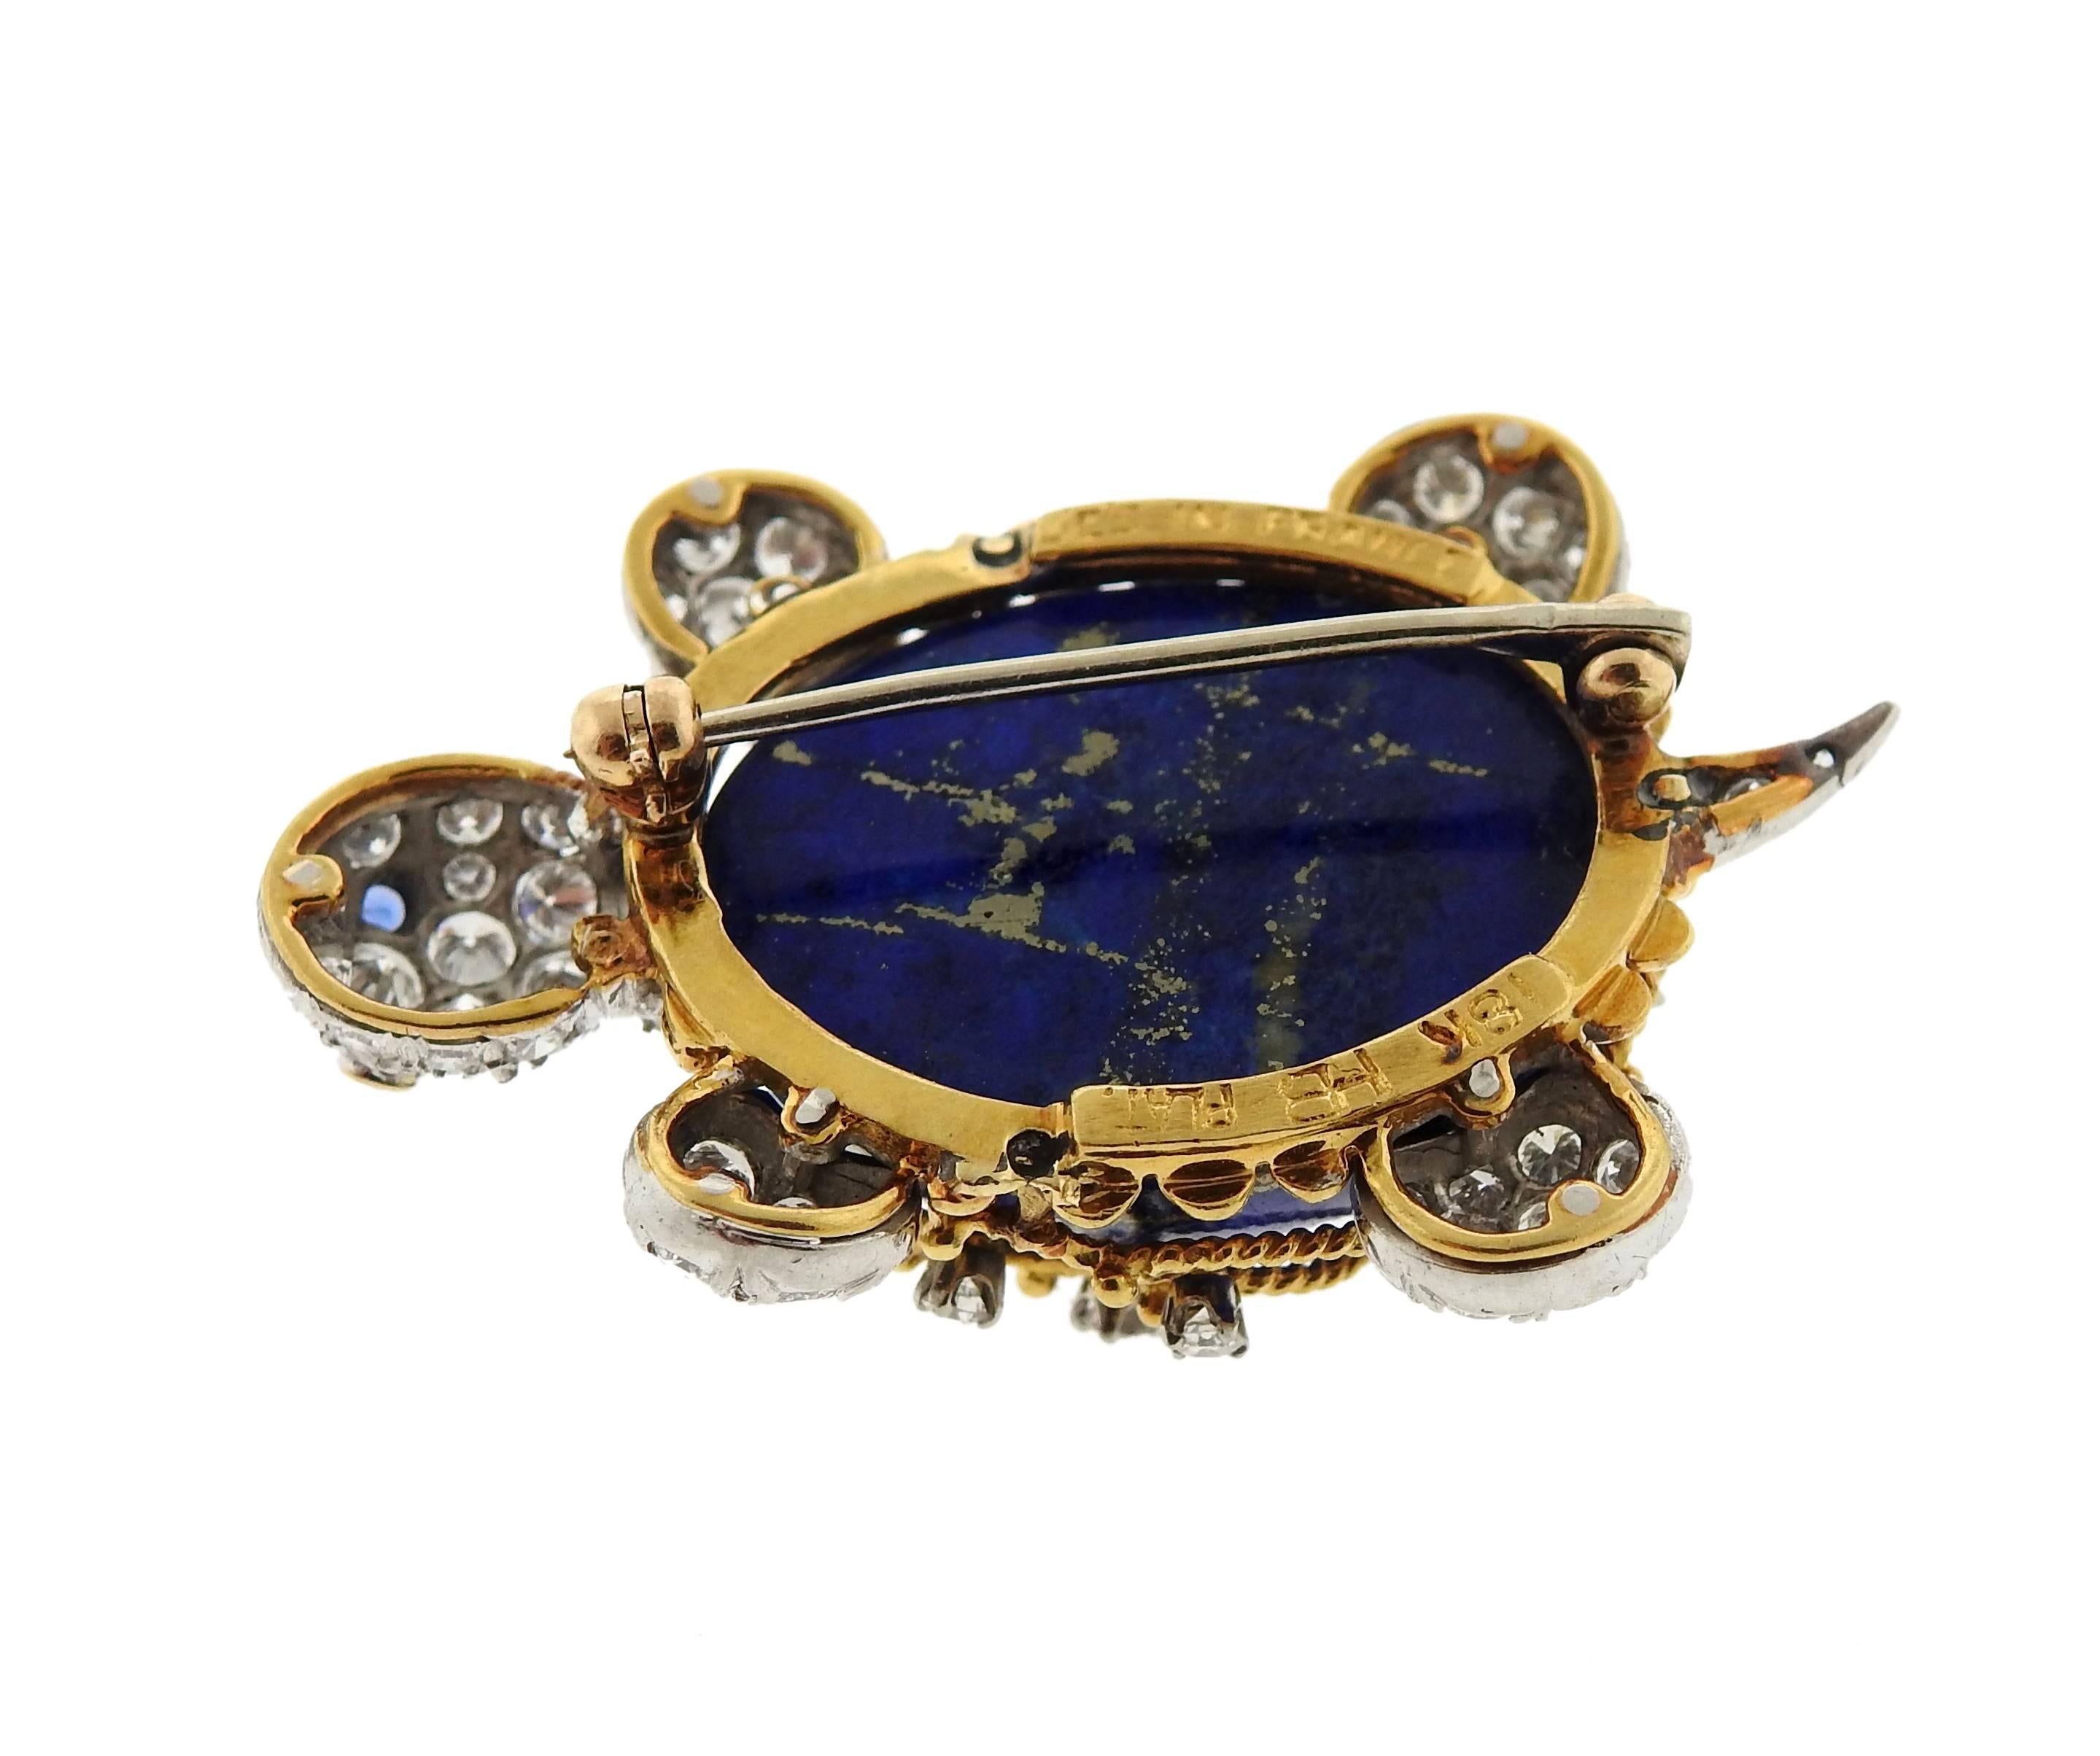 Platinum and 18k gold turtle brooch, crafted by Hammerman Bros, decorated with lapis, sapphire eyes and approximately 1.50ctw in diamonds. Brooch measures 40mm x 27mm. Marked: HB, plat, 18k, les in France. Weight - 17.6 grams 